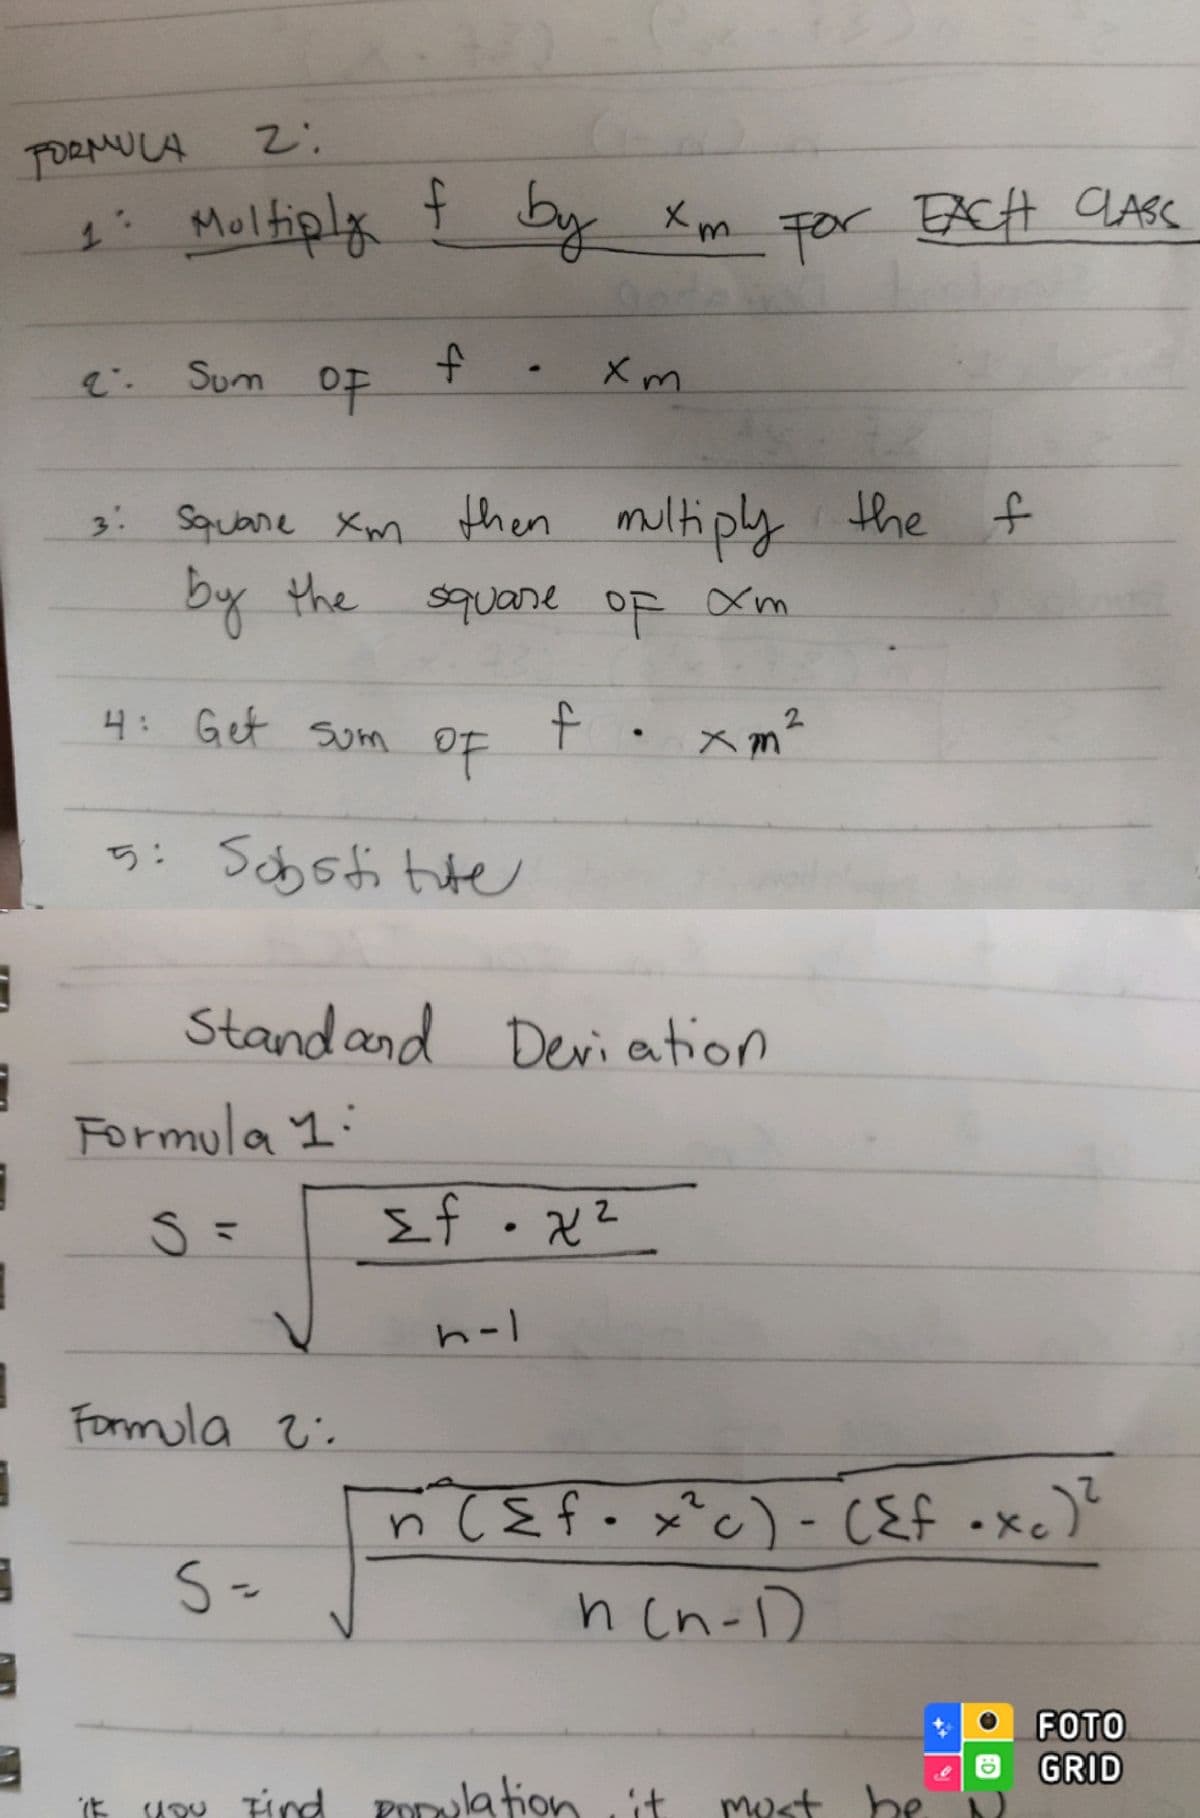 2:
FORMULA
1: Multiply f by xm for EACH CLASS
E
3
3
3
Sum of
4: Get
3: Square xm then multiply the f
by the
square of
xm
sum
4
5: Sobstitute
Formula 1:
S =
Formula 2:
S-
OF
Stand and Deviation
xm
4
n-1
<f.x²
2
xm²
n ({ f. x²c) - ({f .xc)²
n(n-1)
you Find Porylation, it
must be
ED
FOTO
GRID